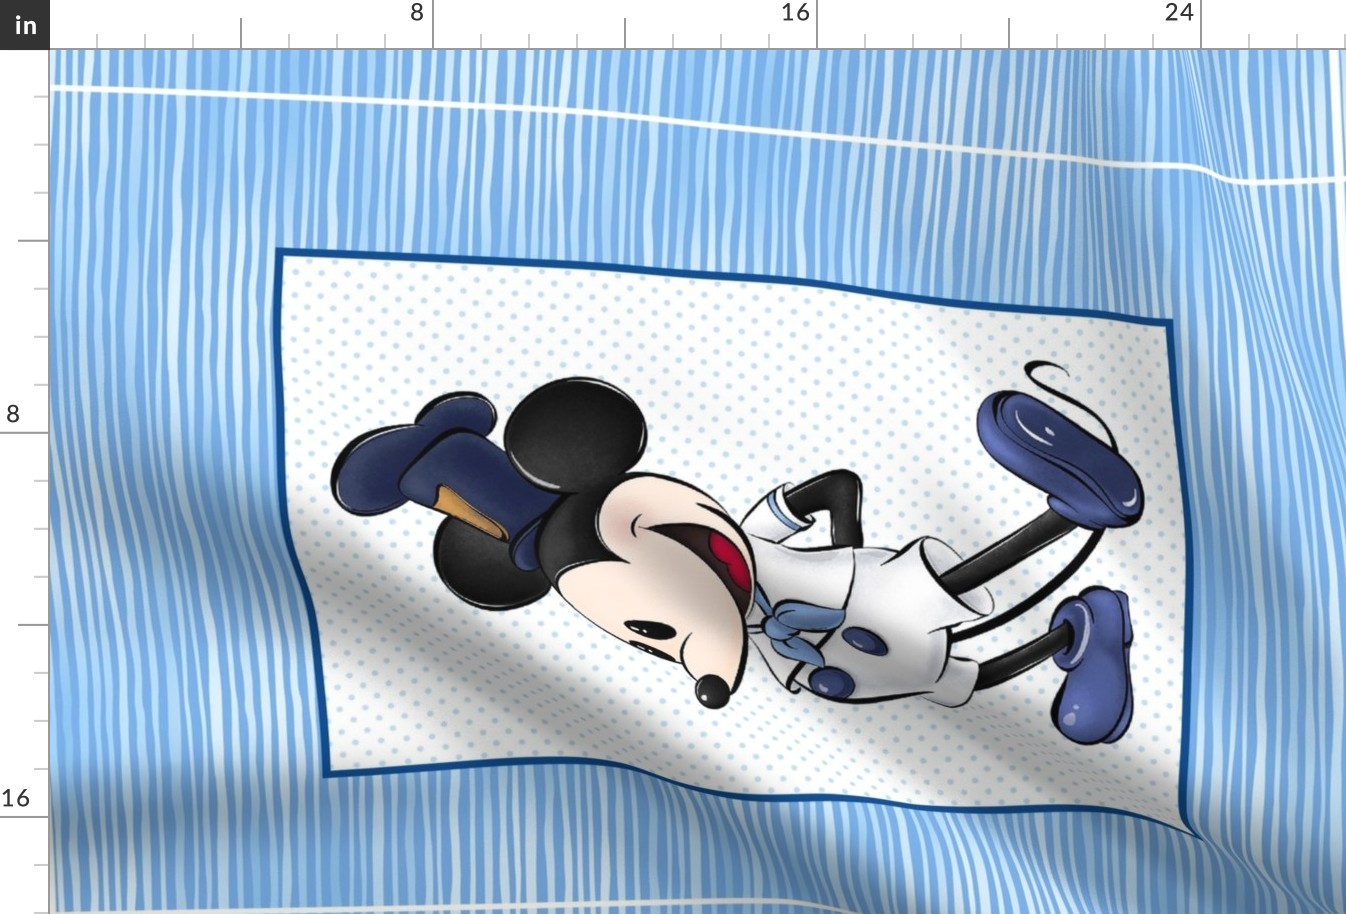 Steamboat Willie Nursery Wall Hanging